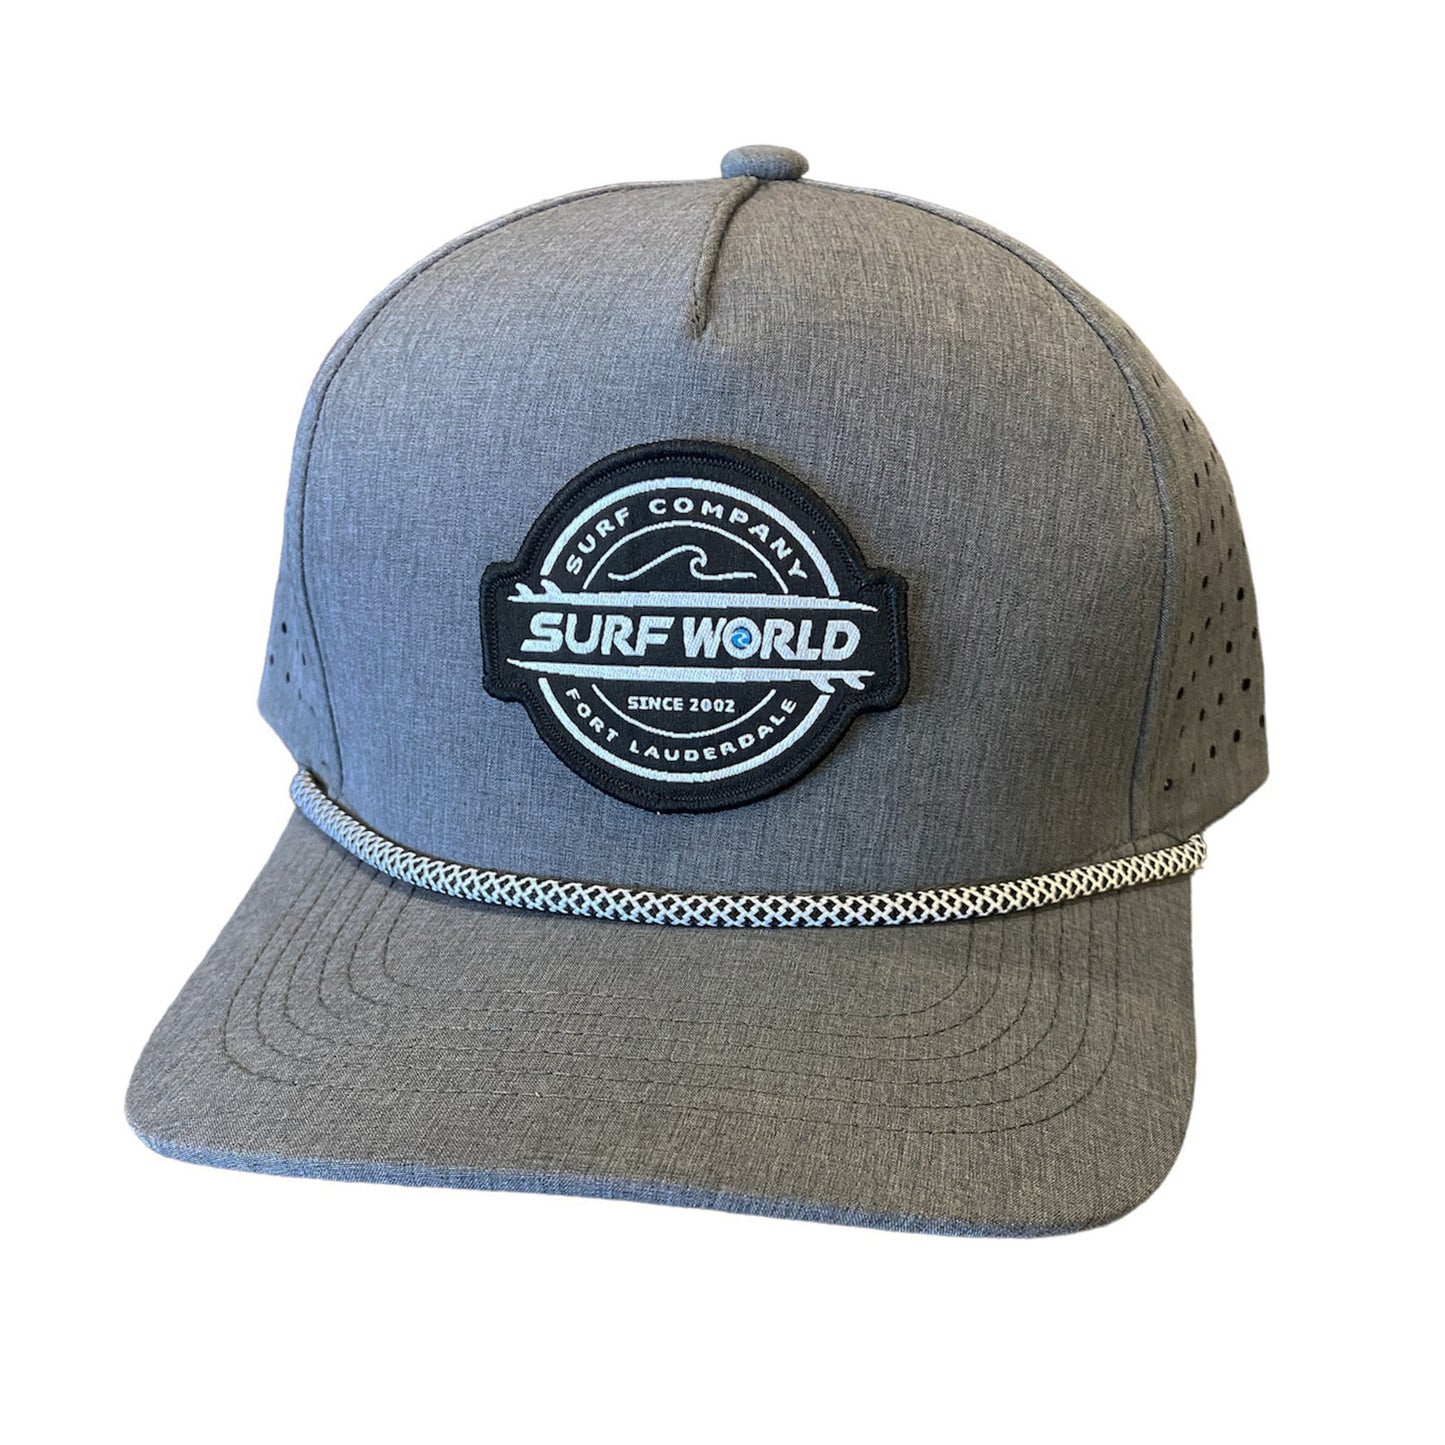 Surf World Performance Snap Back Hat - Black / Grey / White Hats Charcoal Double Boards